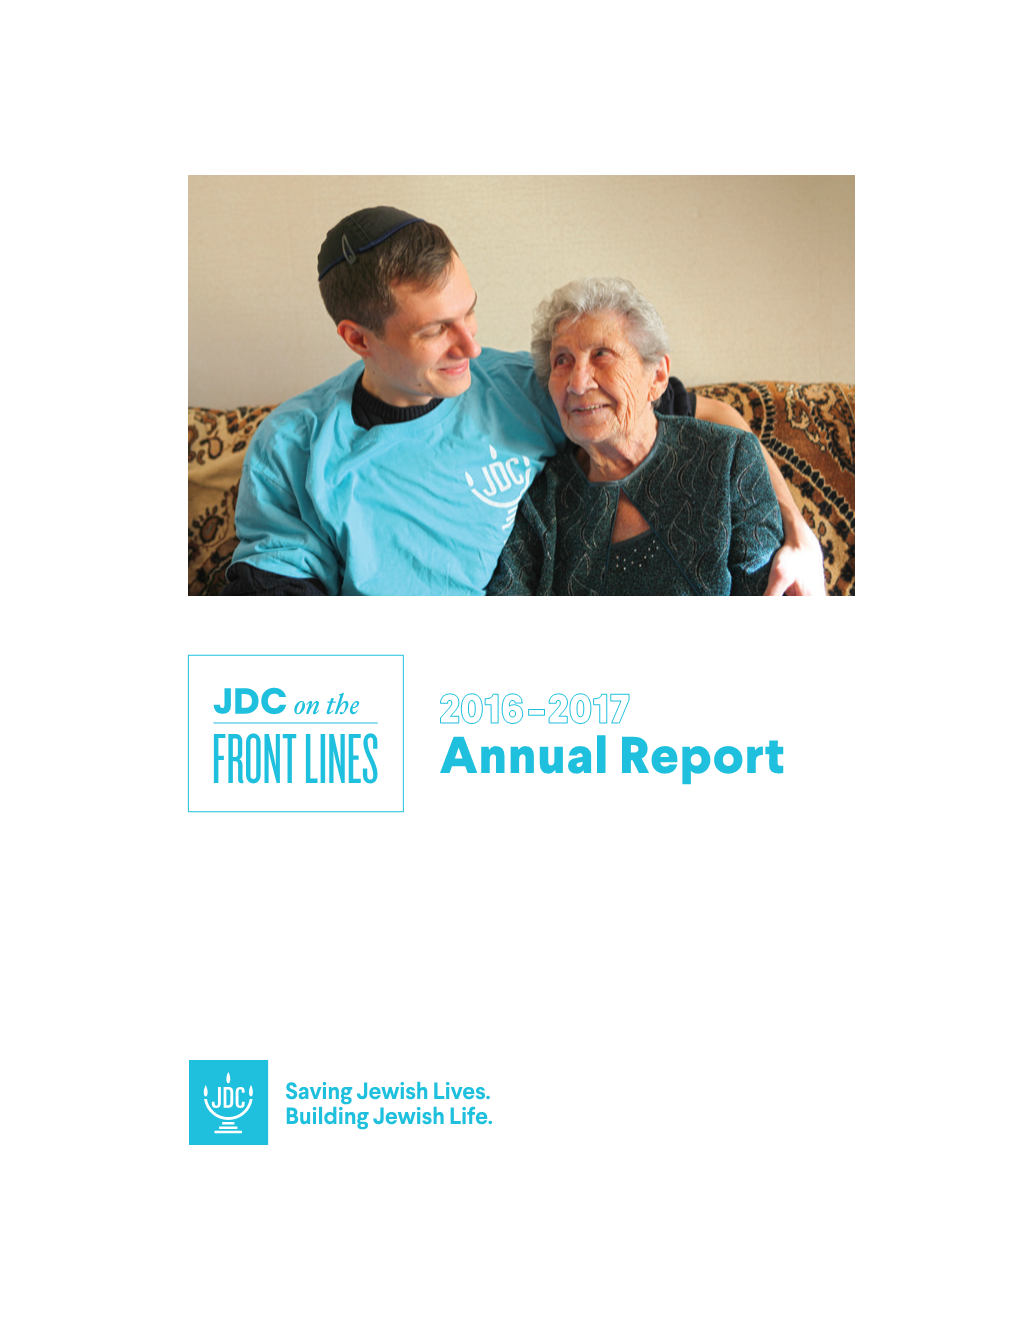 JDC on the FRONT LINES Annual Report